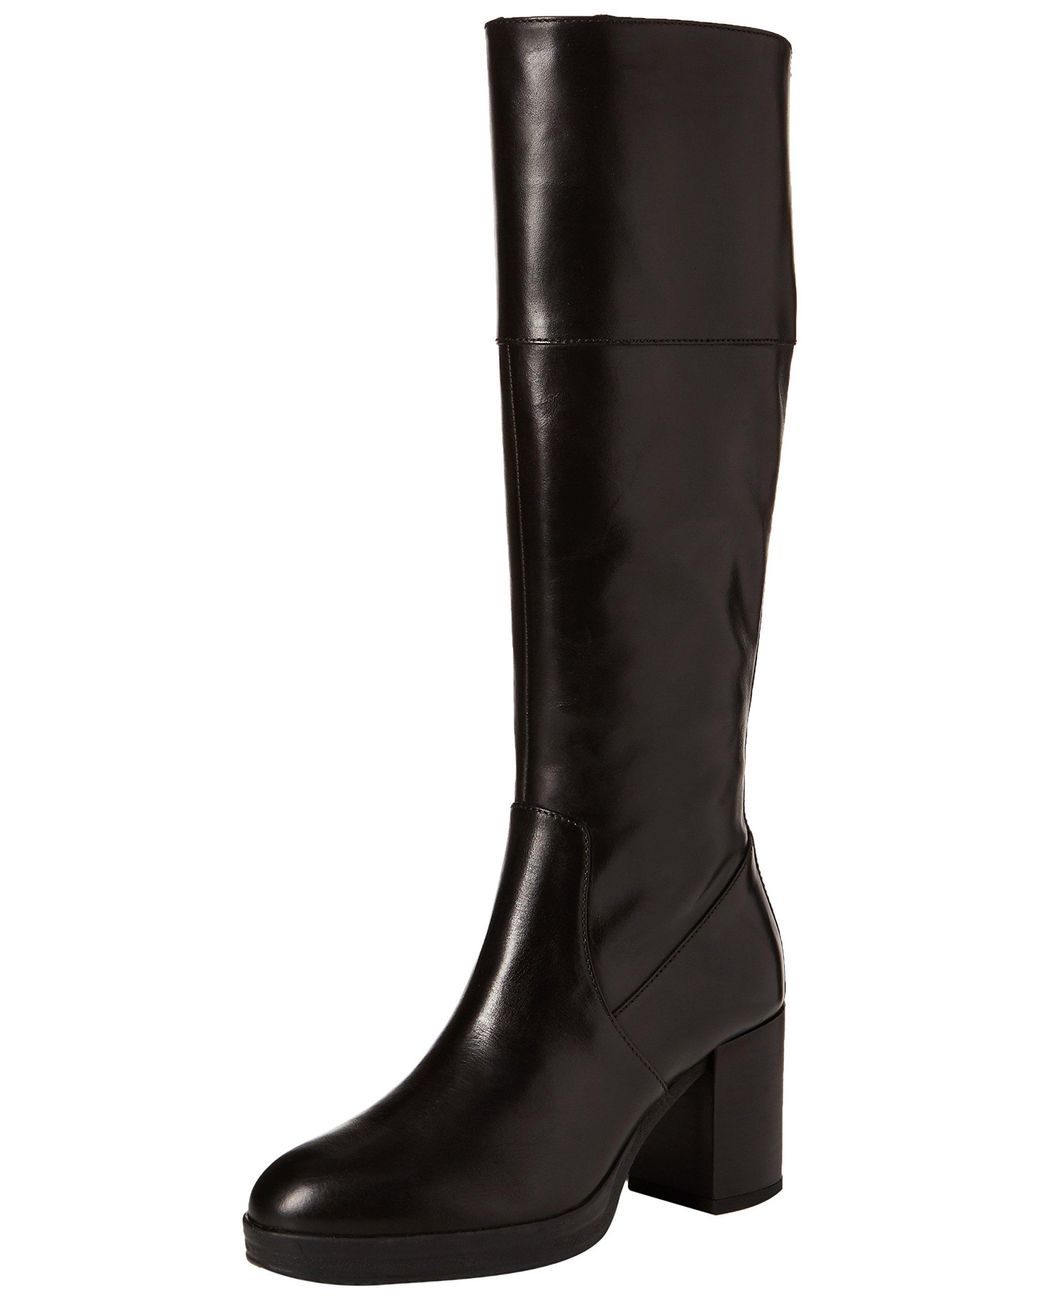 Geox Remigia Boots Clearance - 1688433549